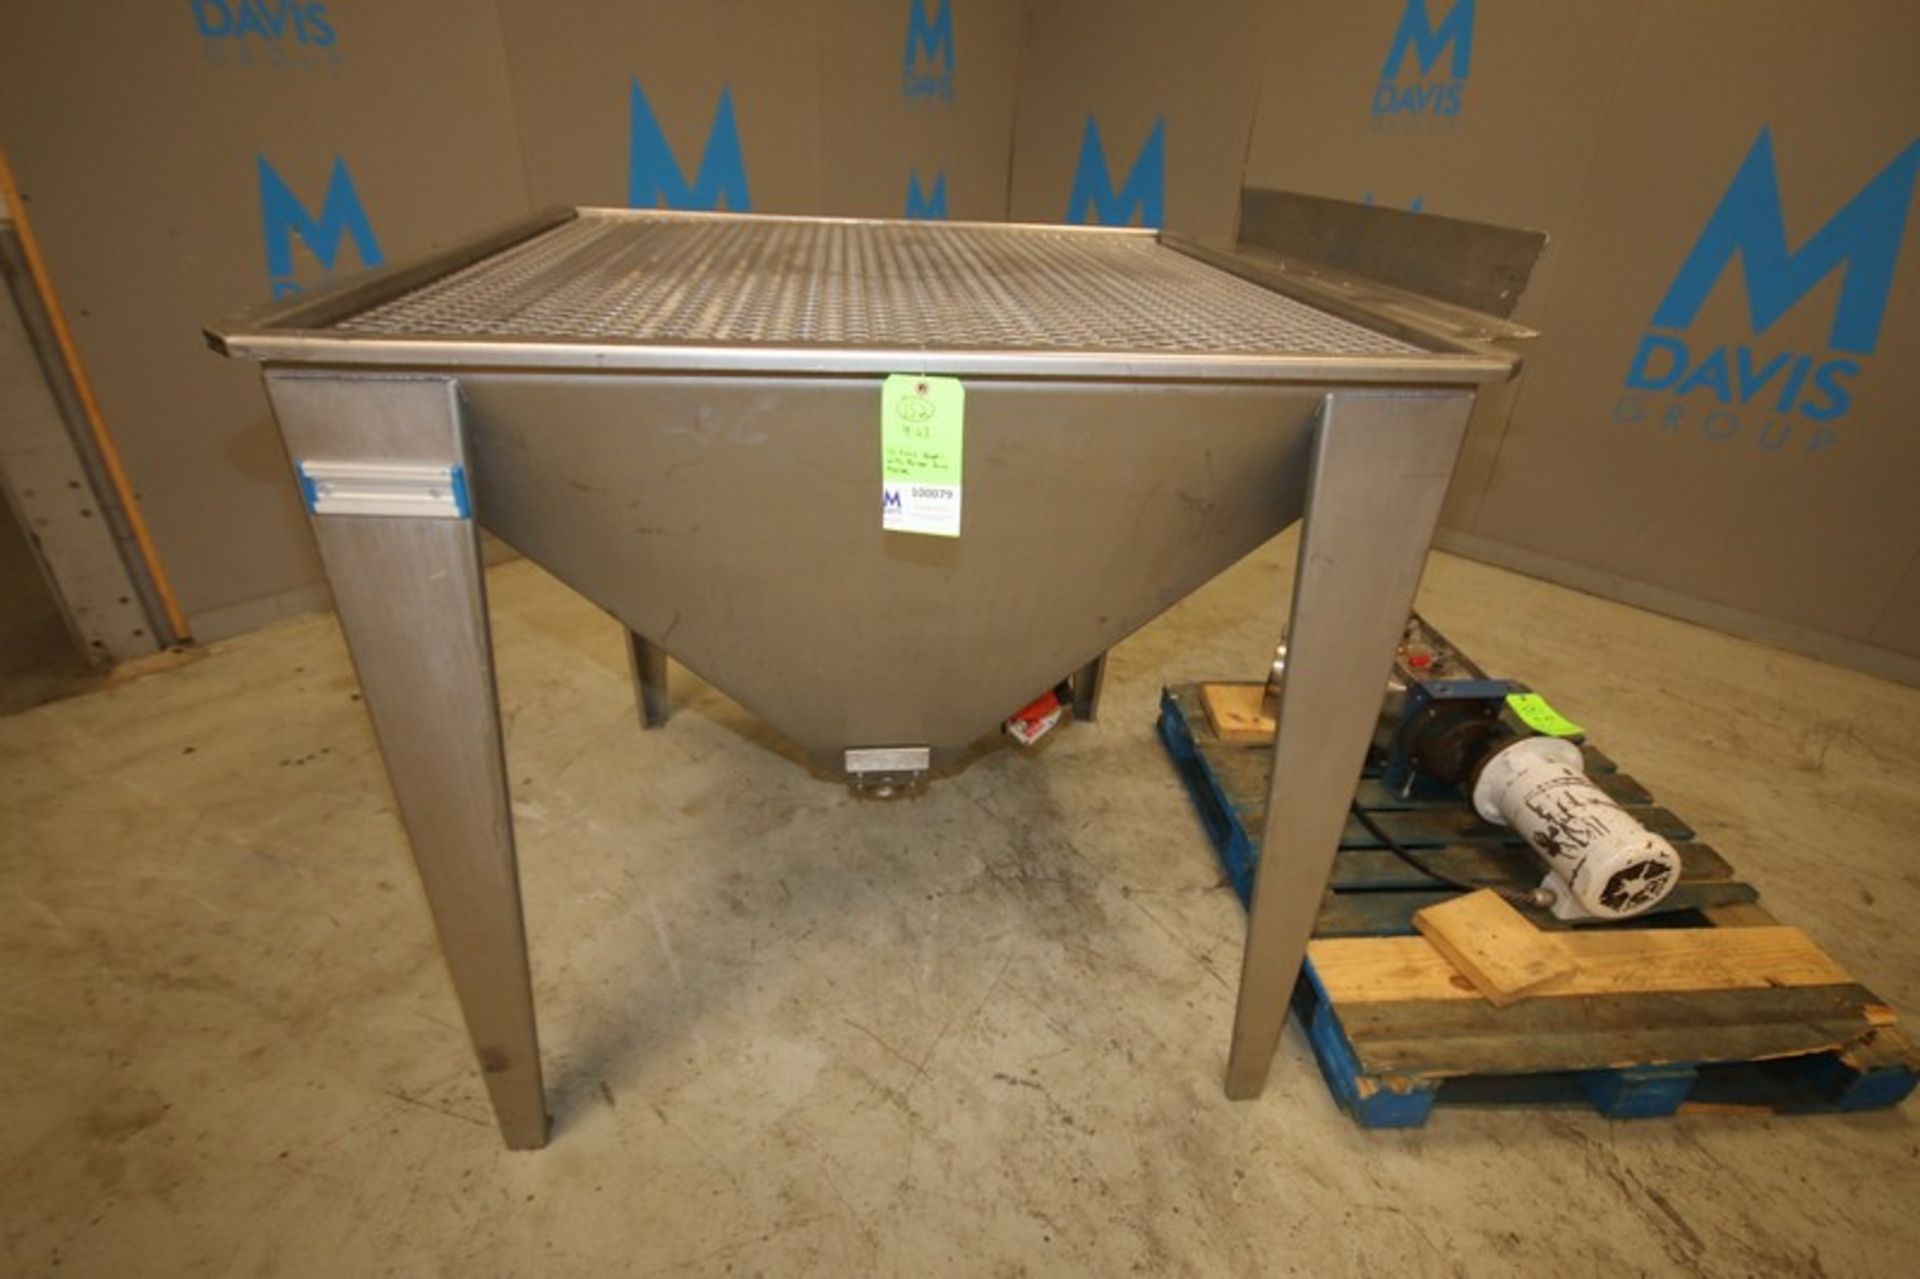 Flexicon 48" L x 48" W x 49" H S/S Feed Hopper with S/S Safety Screen, Vibco Side Mounted - Image 2 of 7